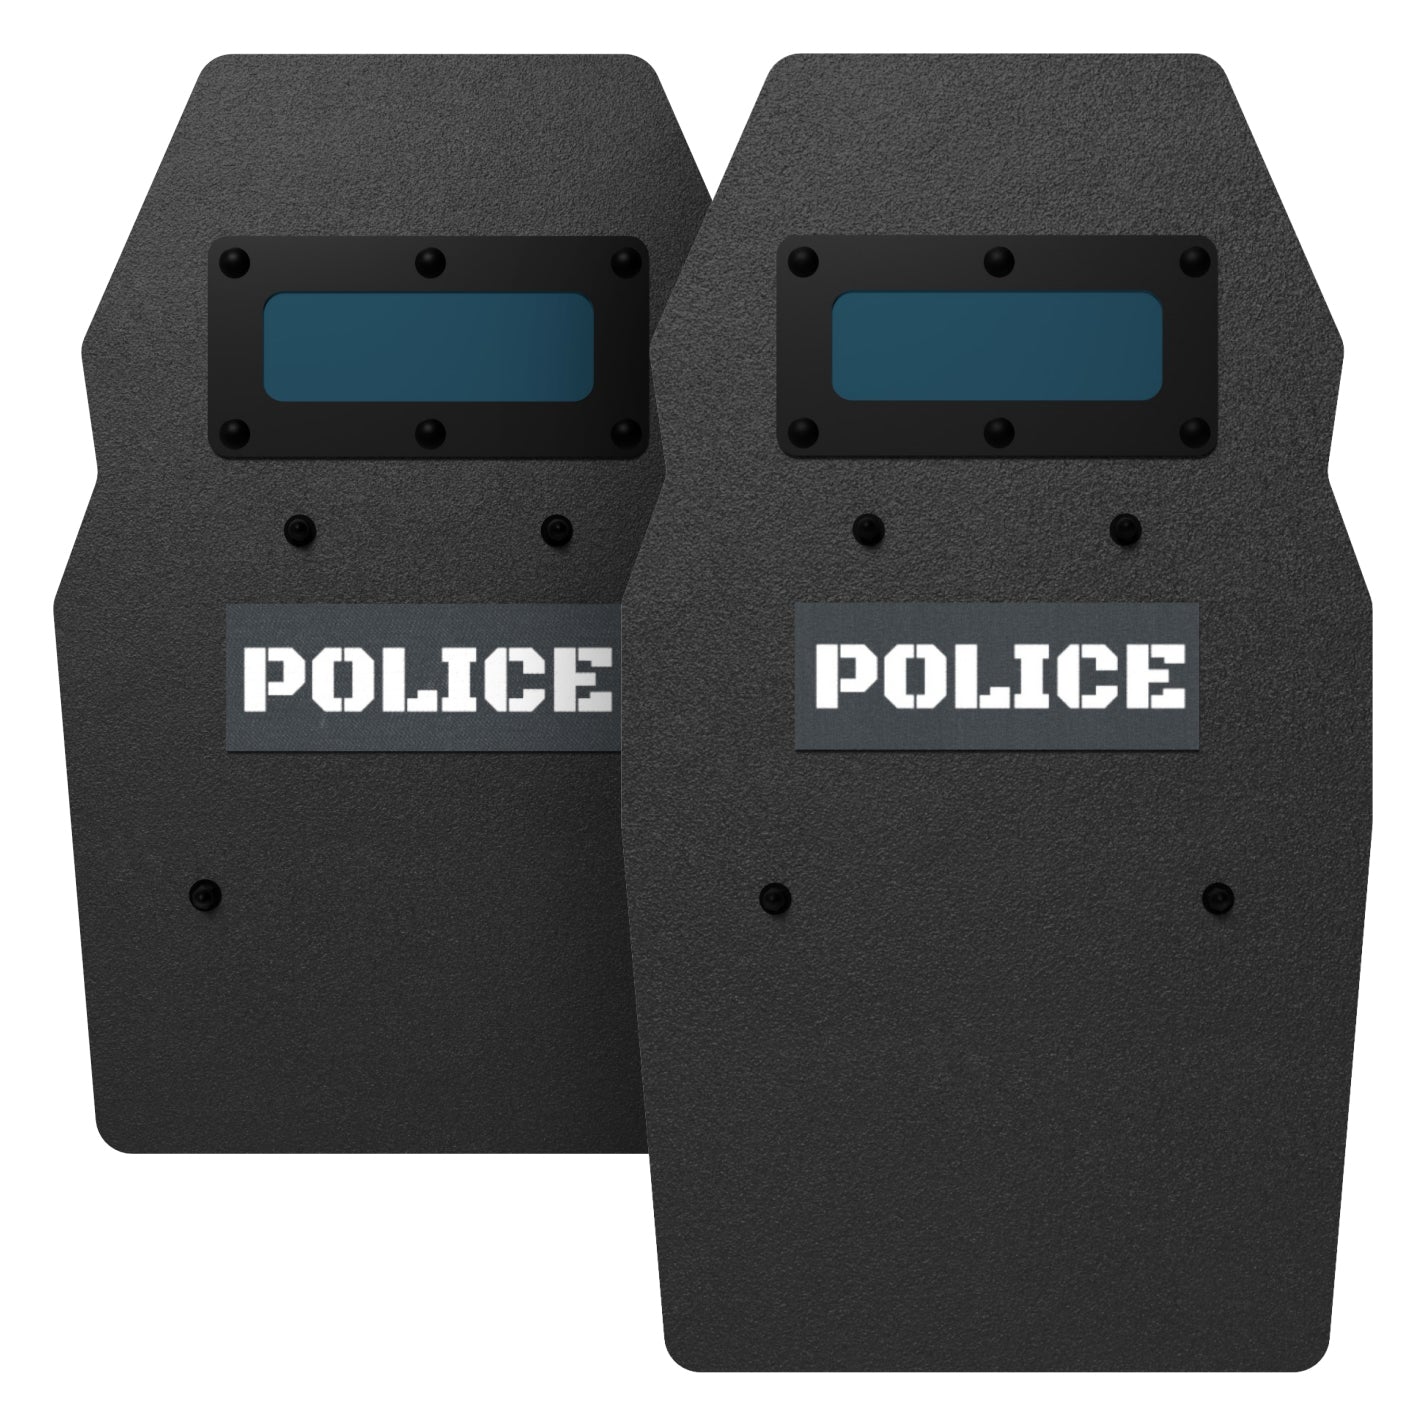 The Role of Police Shields